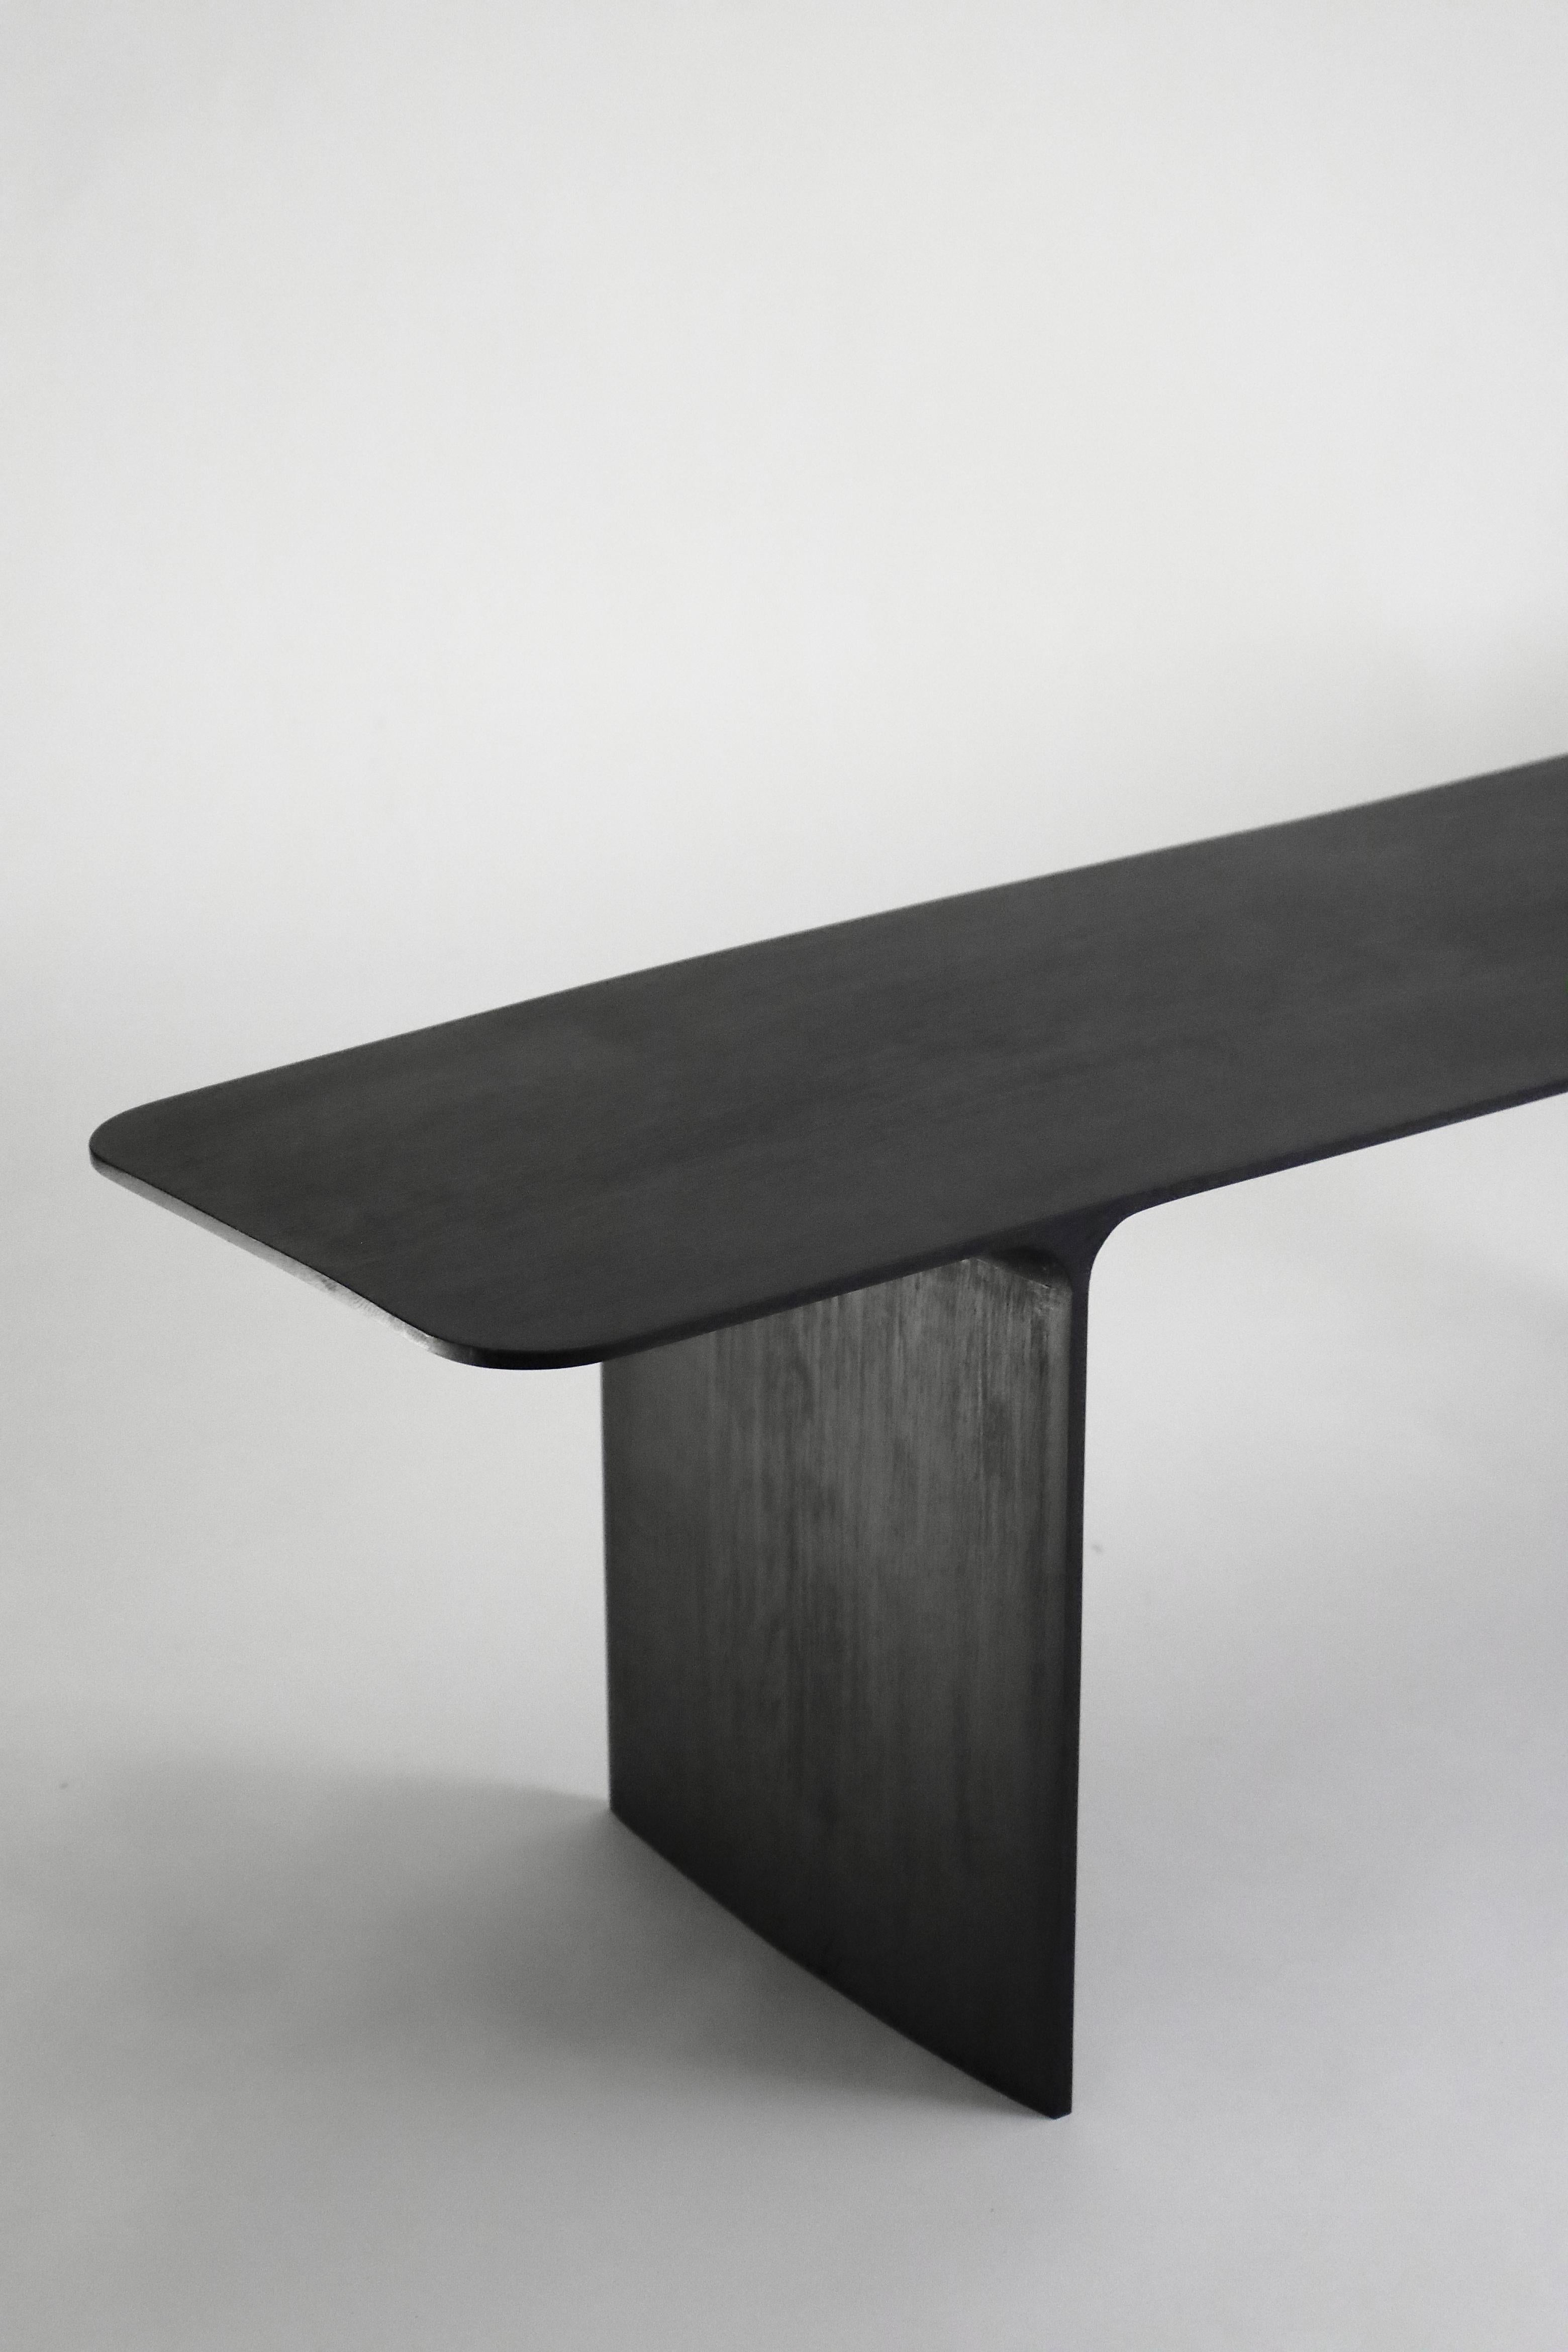 Shave console desk, hand-sculpted and signed by Cedric Breisacher
Hand-sculpted and signed by Cedric Breisacher
Materials: Oak, Oxyde black
Dimension: L 160 x l 40 x H 80
Can be made to order in other dimensions and